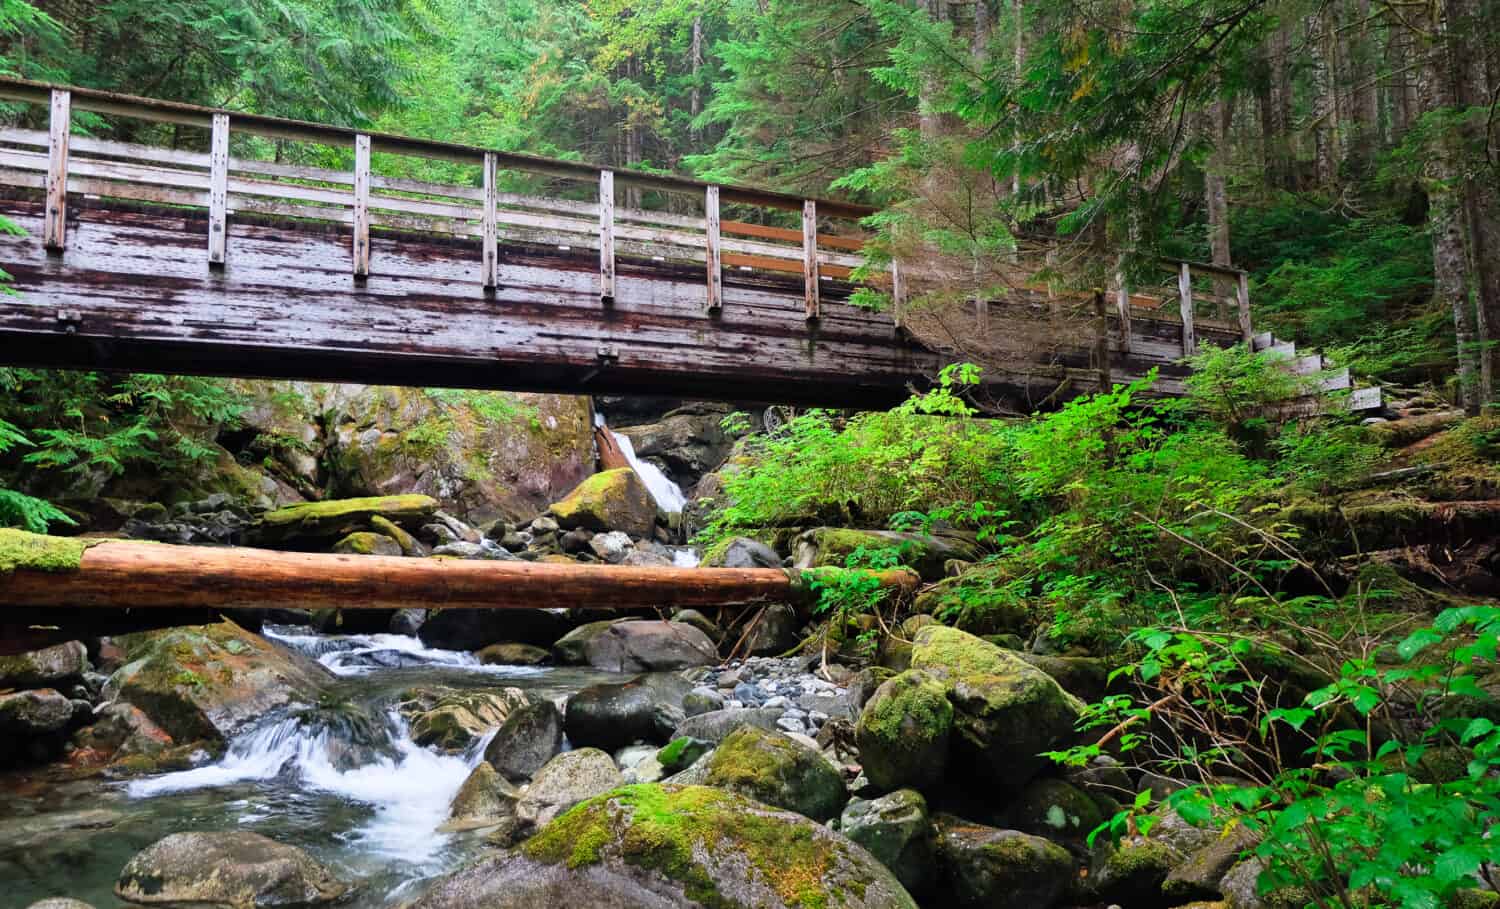 A Bridge and Lush Forest Near The Snoqualmie River. North Bend, Washington